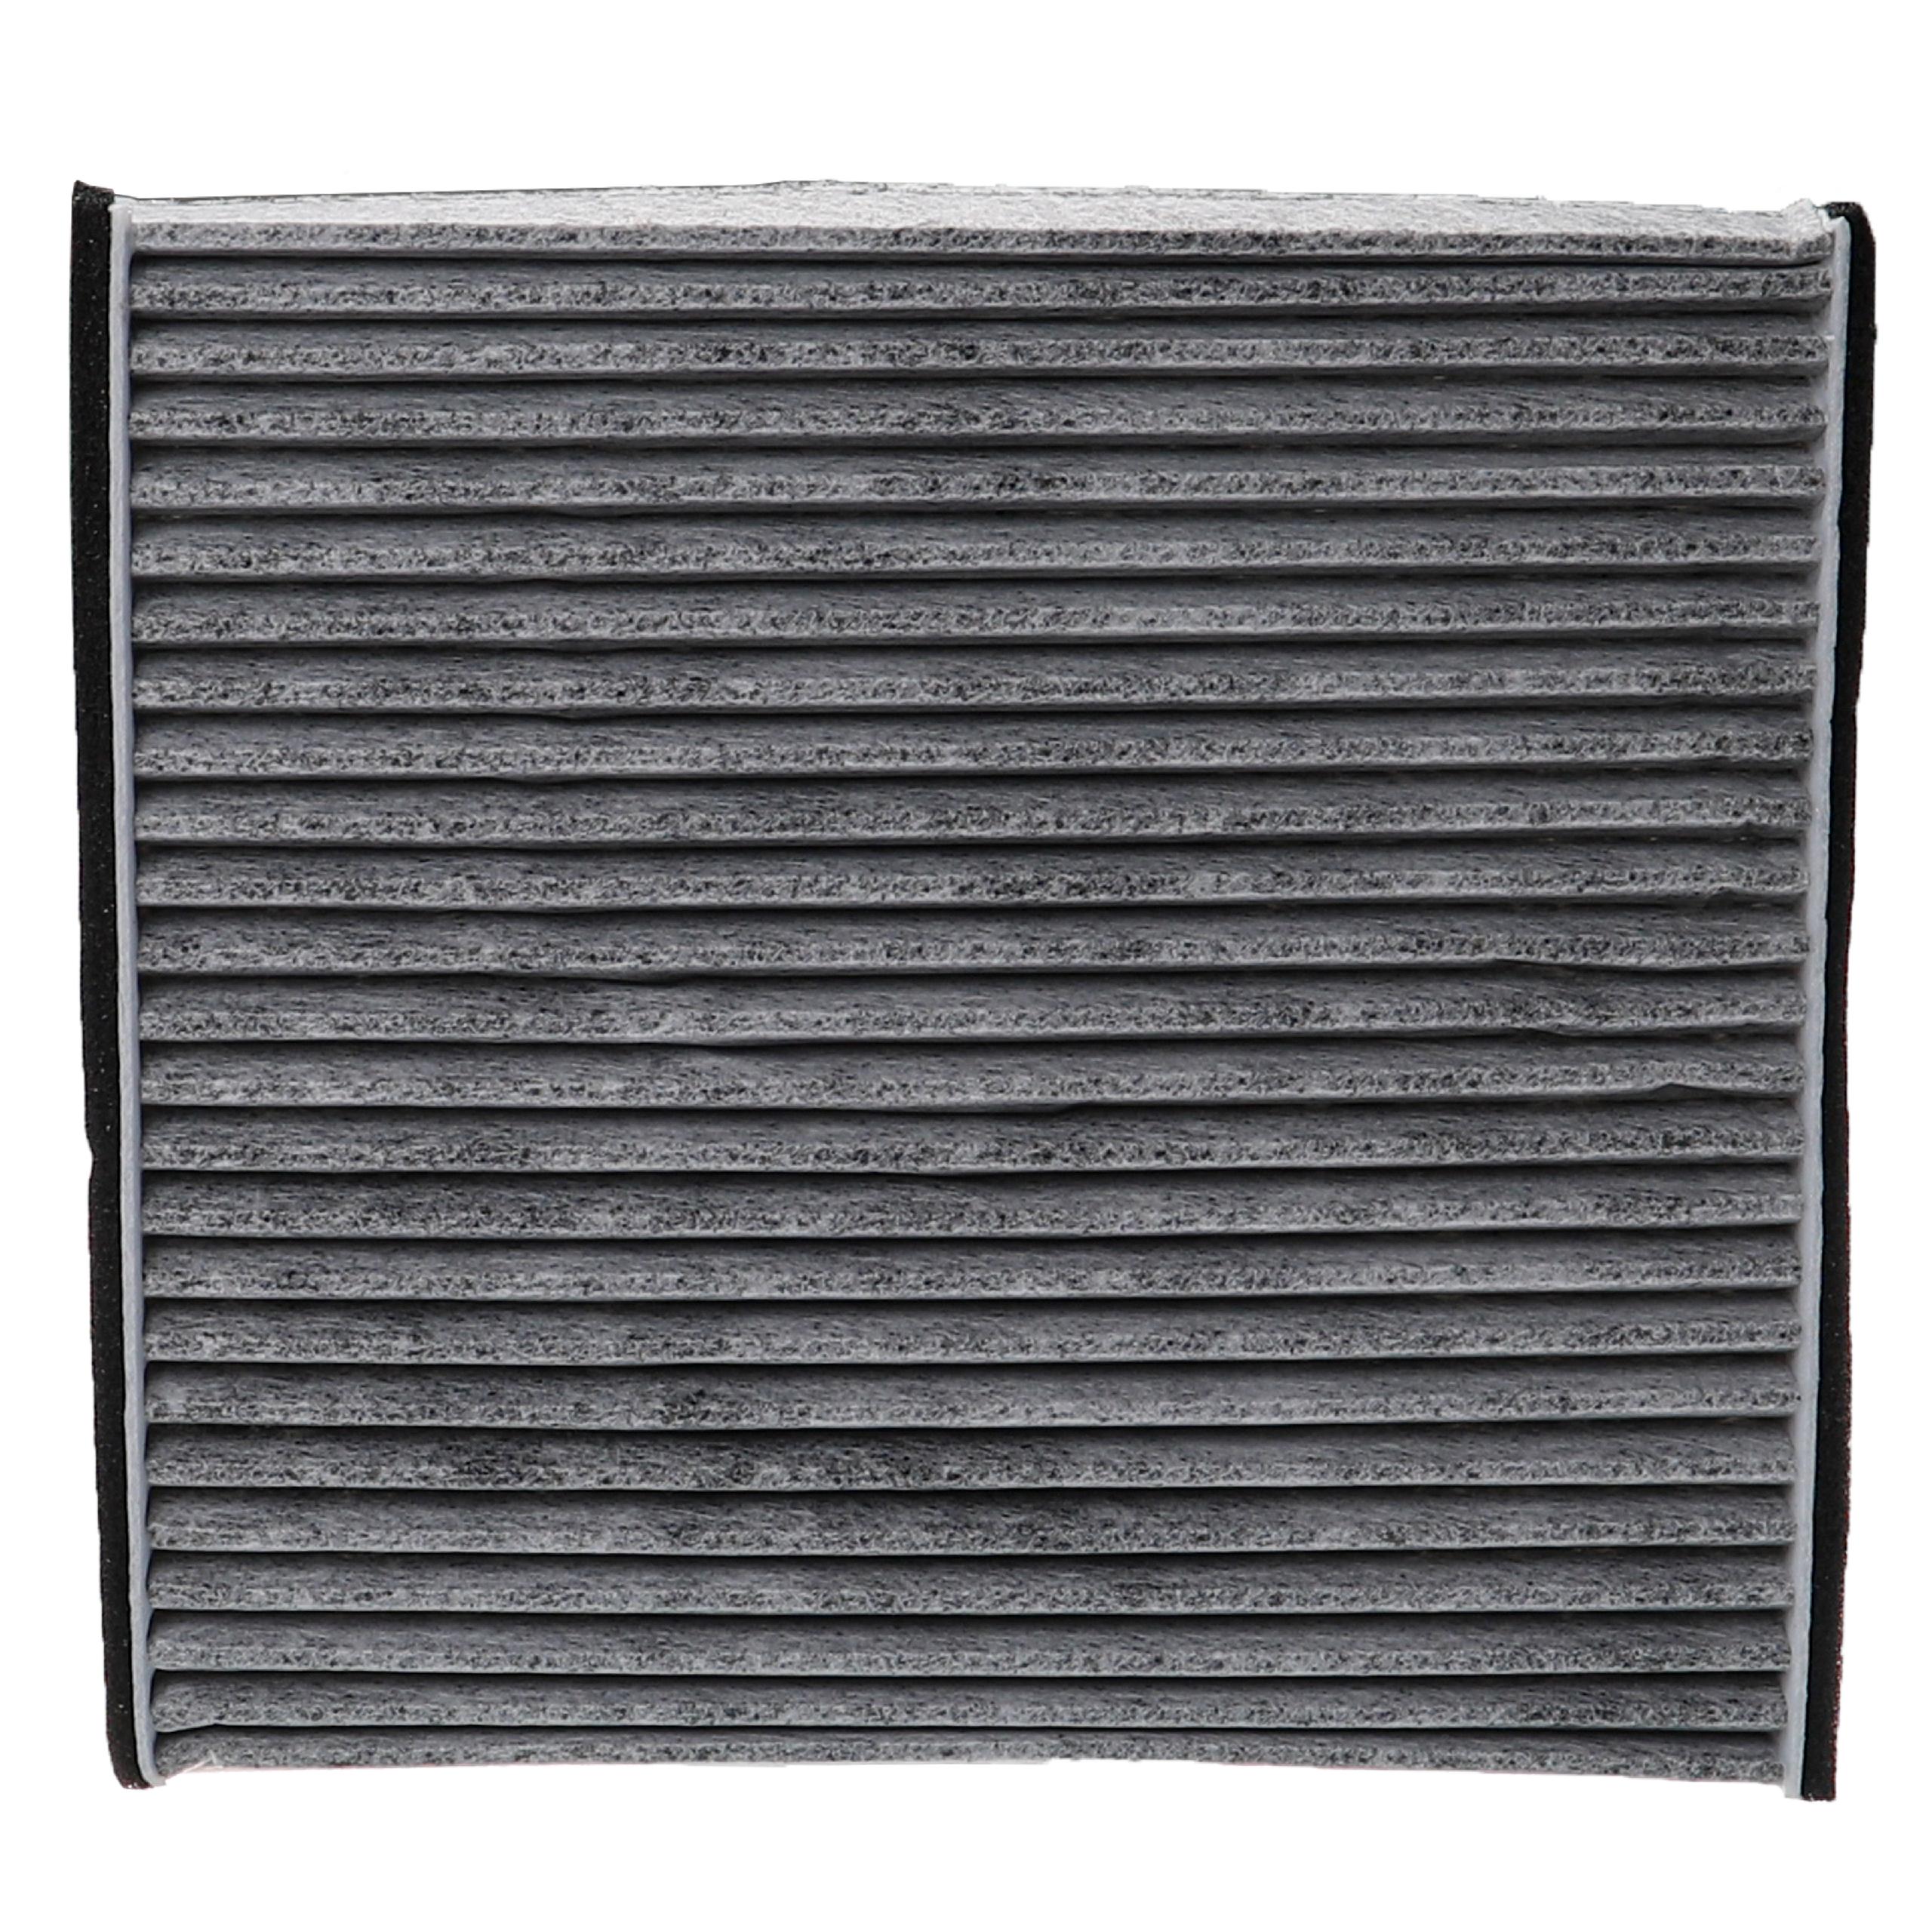 Cabin Air Filter replaces Alco Filter MS-6240 etc.